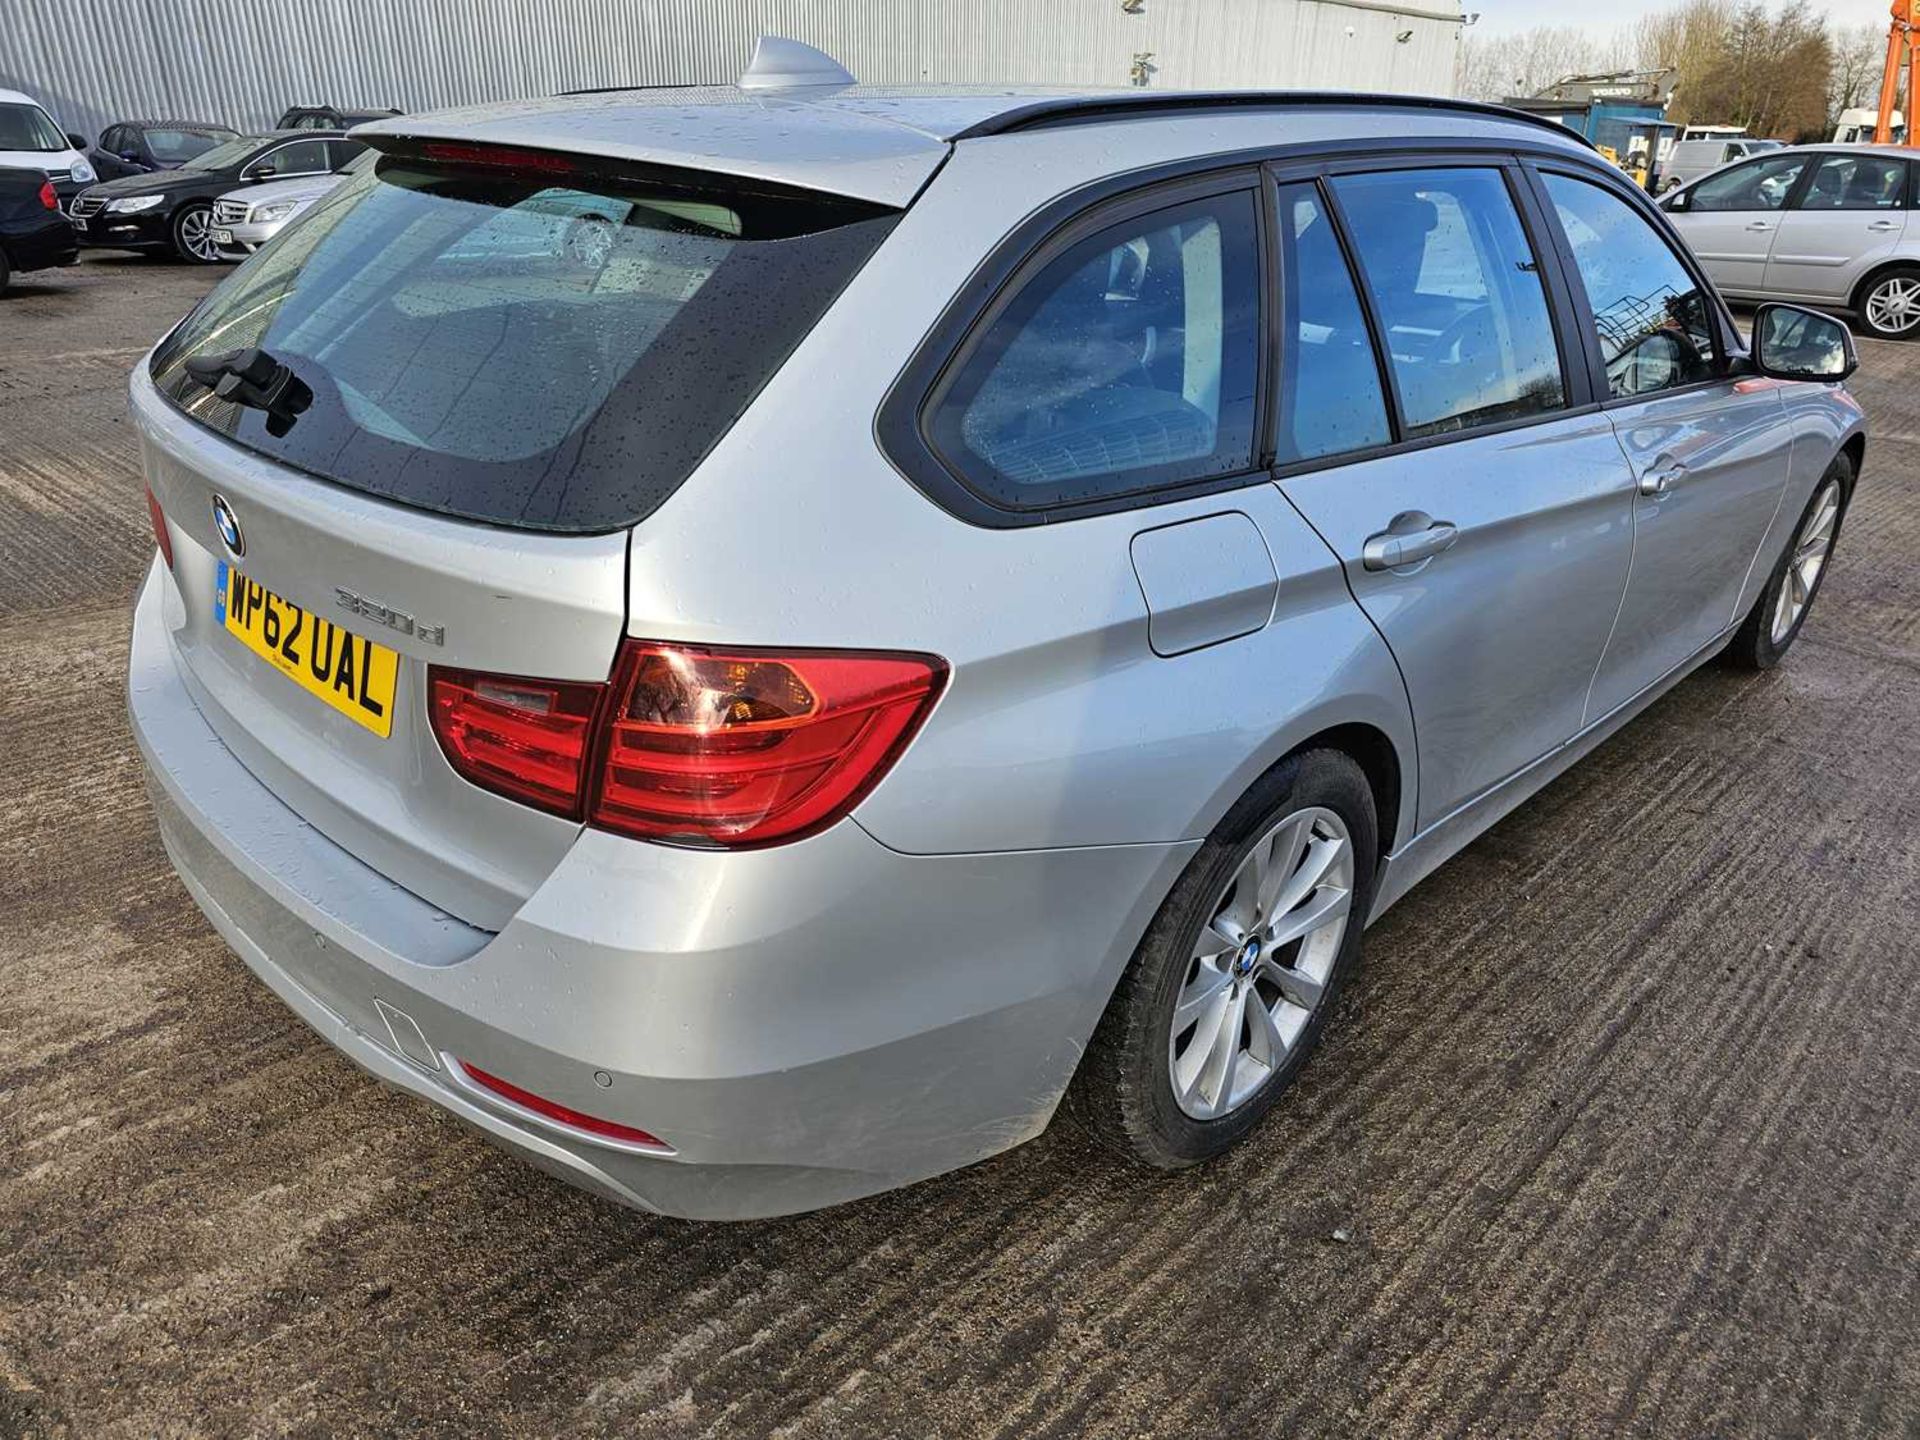 2013 BMW 320D Estate, Auto, Parking Sensors, Full Leather, Heated Seats, Bluetooth, Cruise Control,  - Image 3 of 29